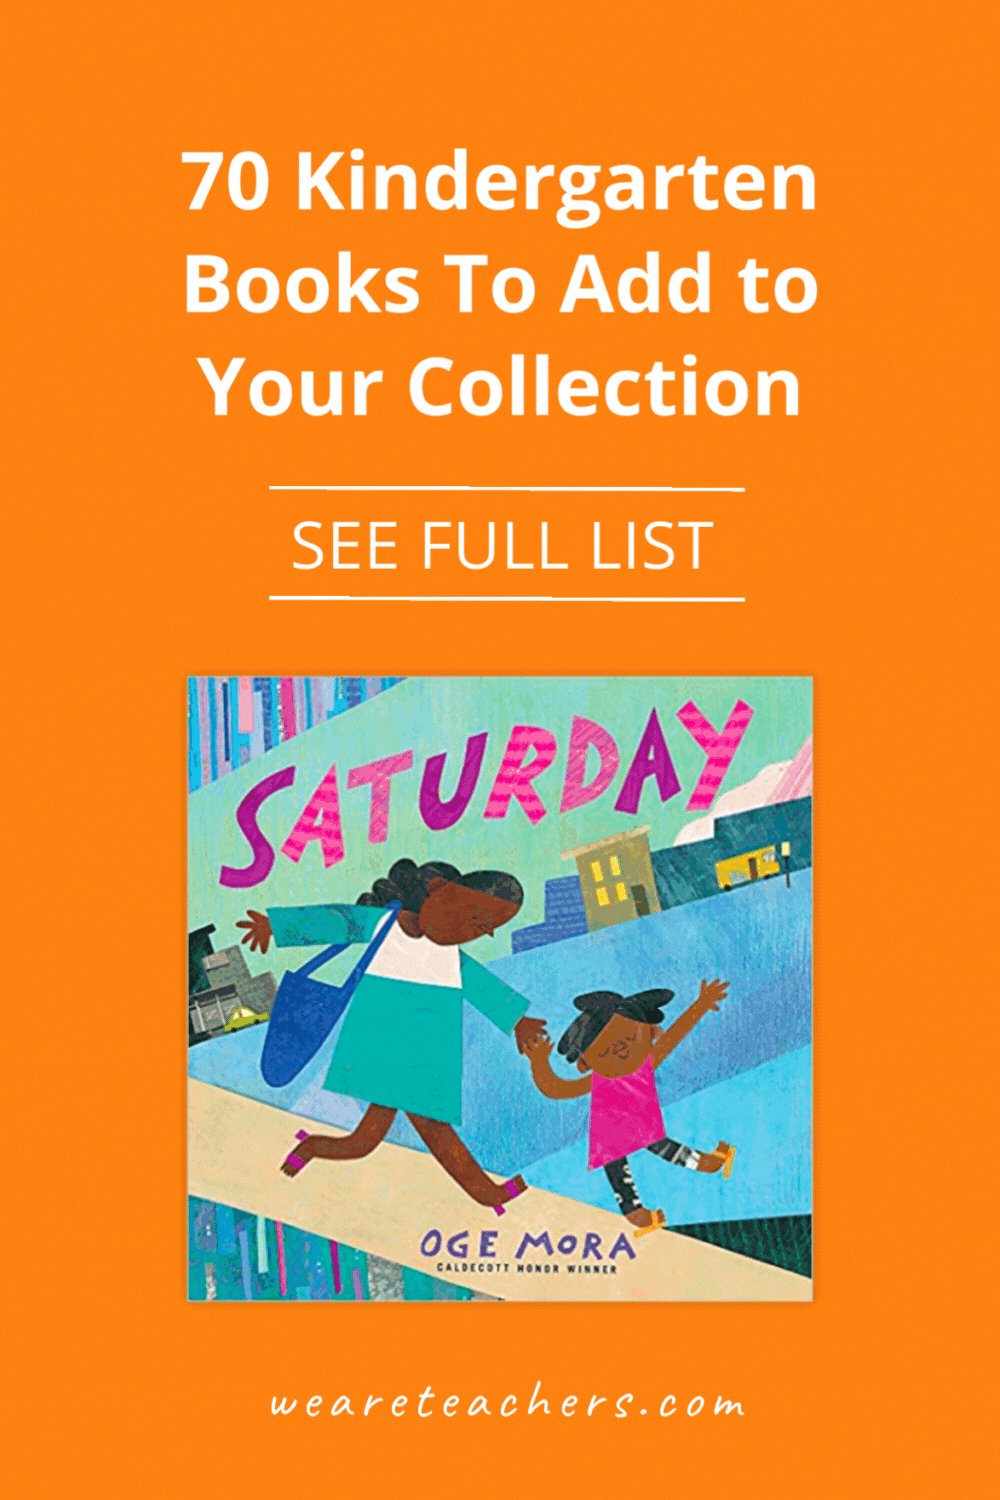 Time to go book shopping! If you're looking to add kindergarten books to your classroom library, check out these 70 awesome recent titles.